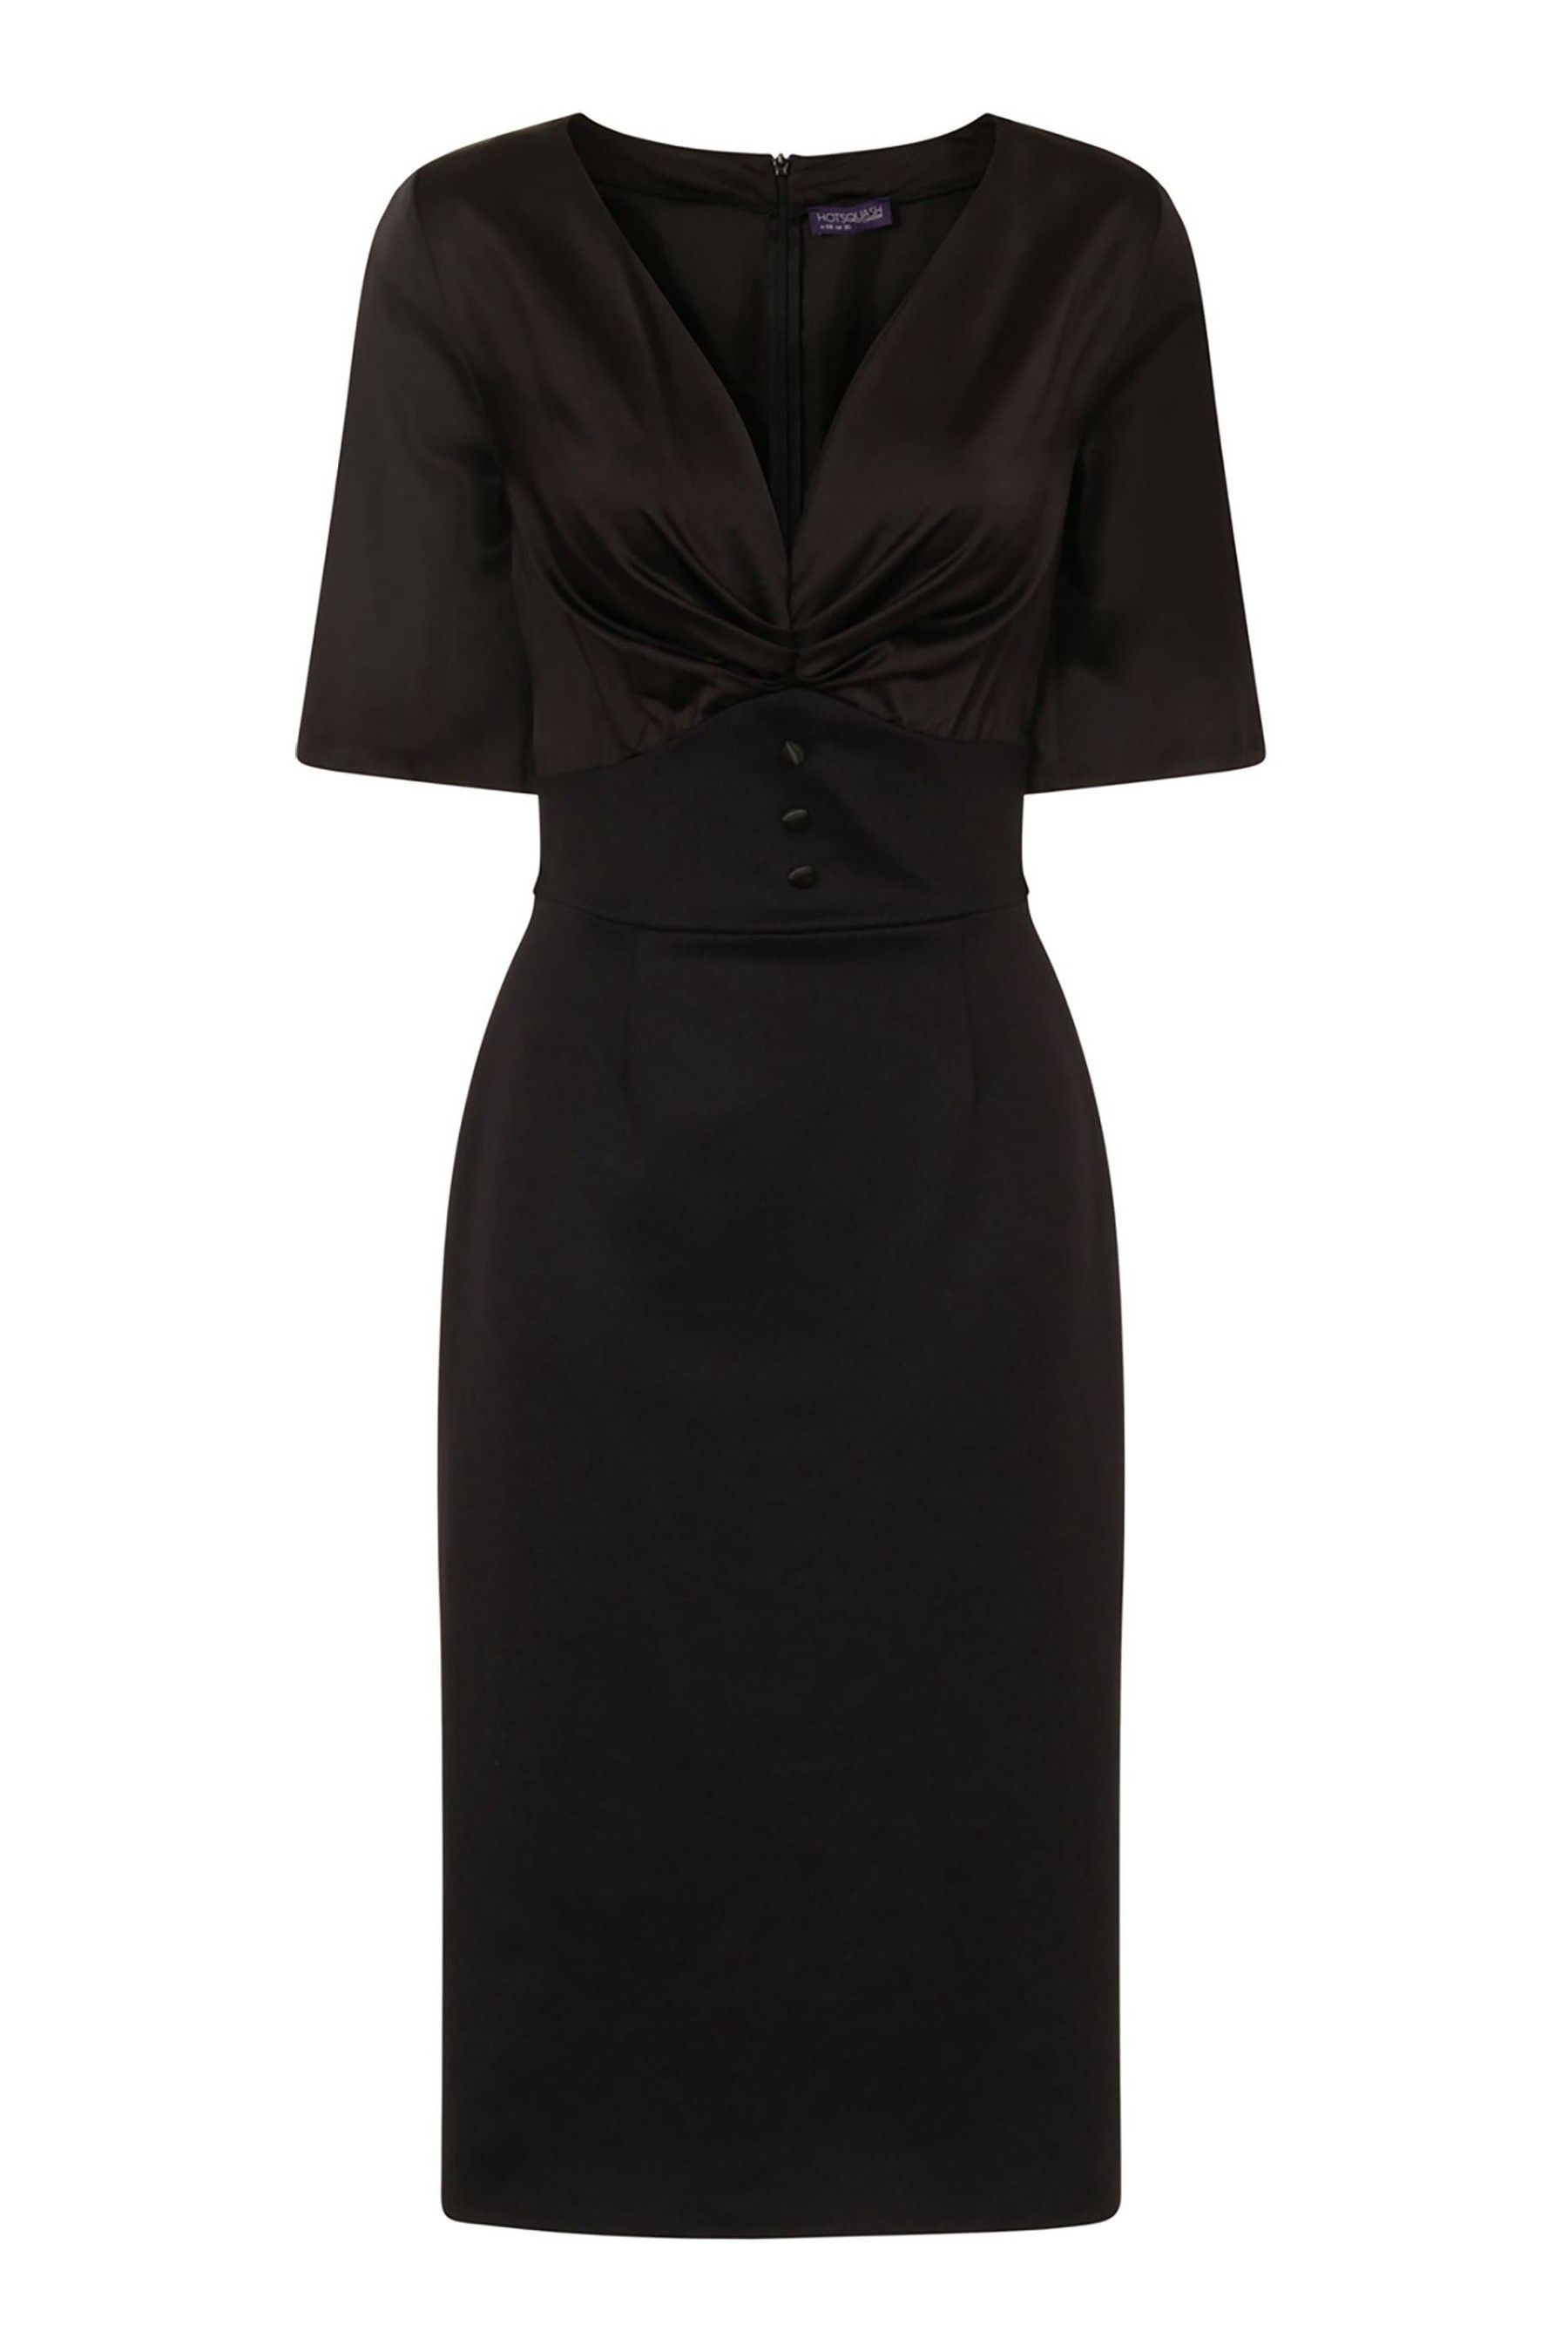 Buy Hotsquash Black Emma Dress With Buttons from the Next UK online shop